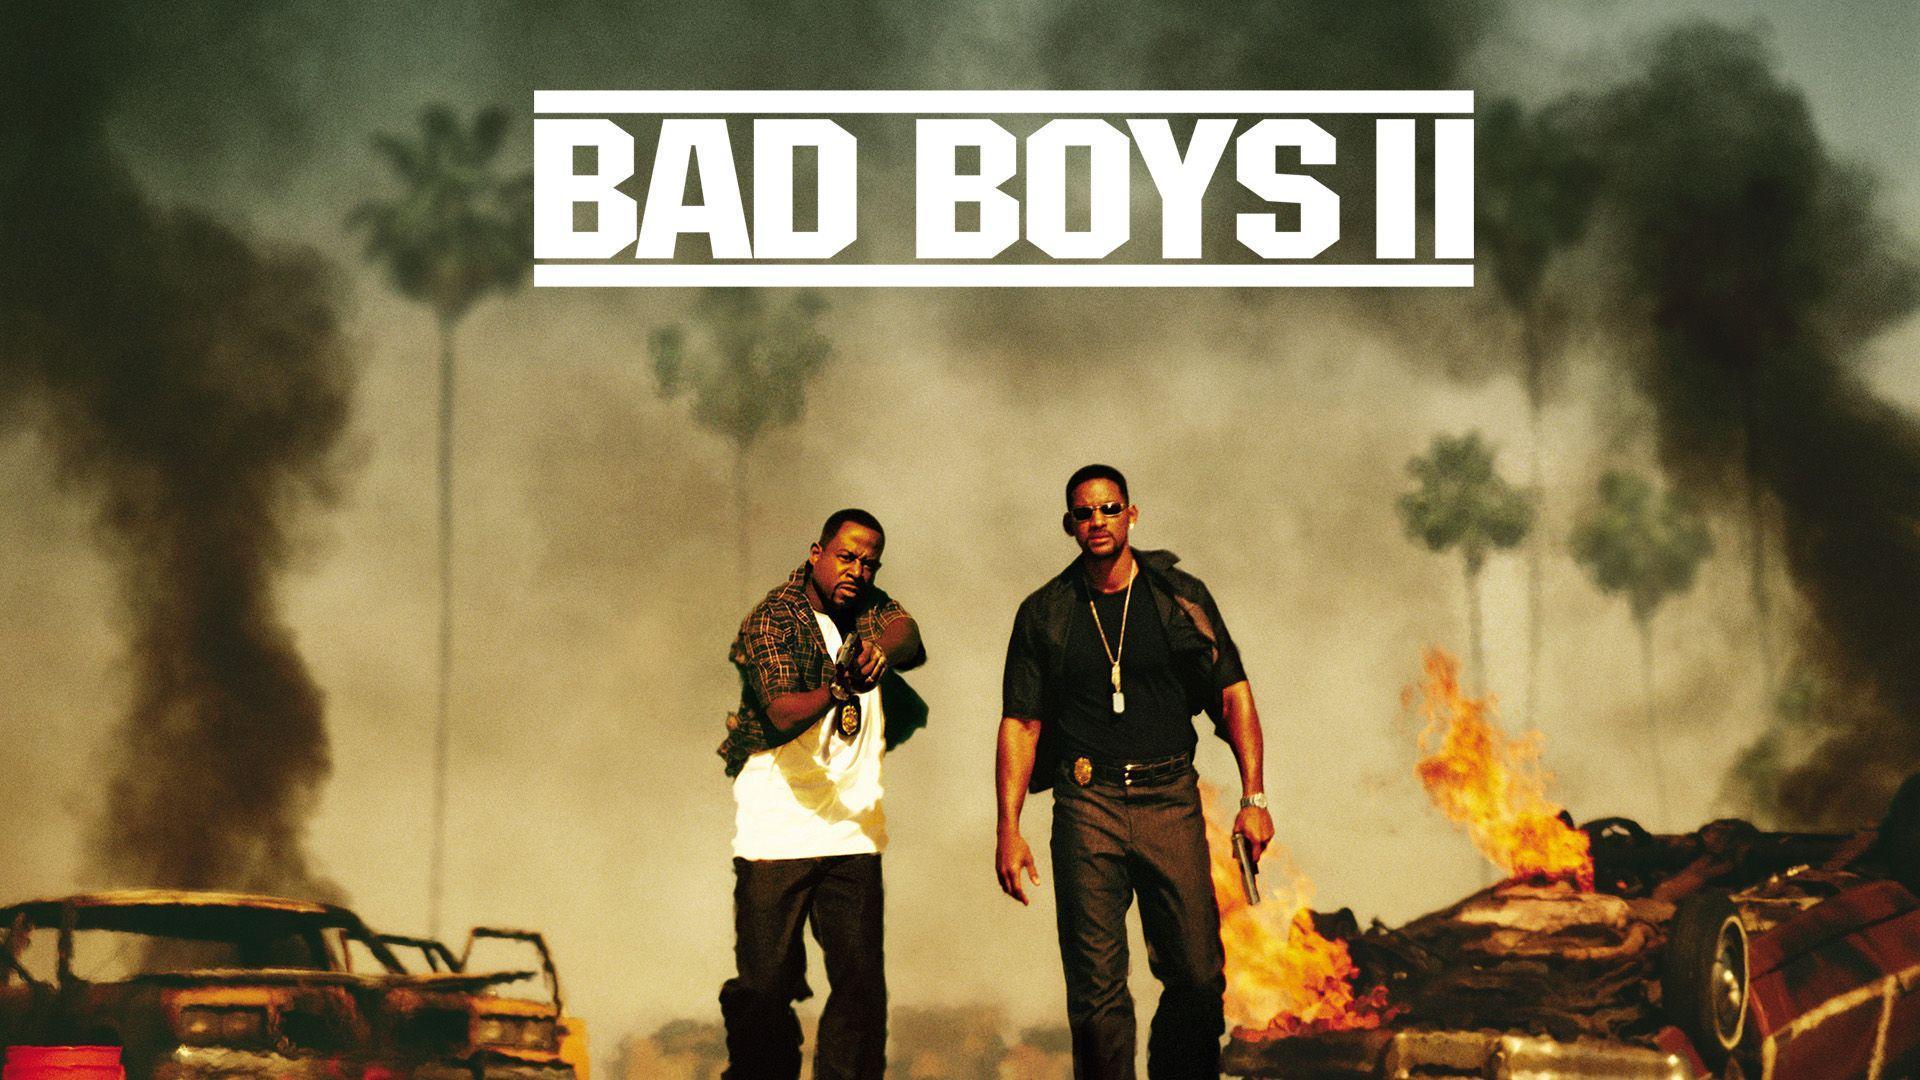 Bad Boys 2 Wallpapers Top Free Bad Boys 2 Backgrounds